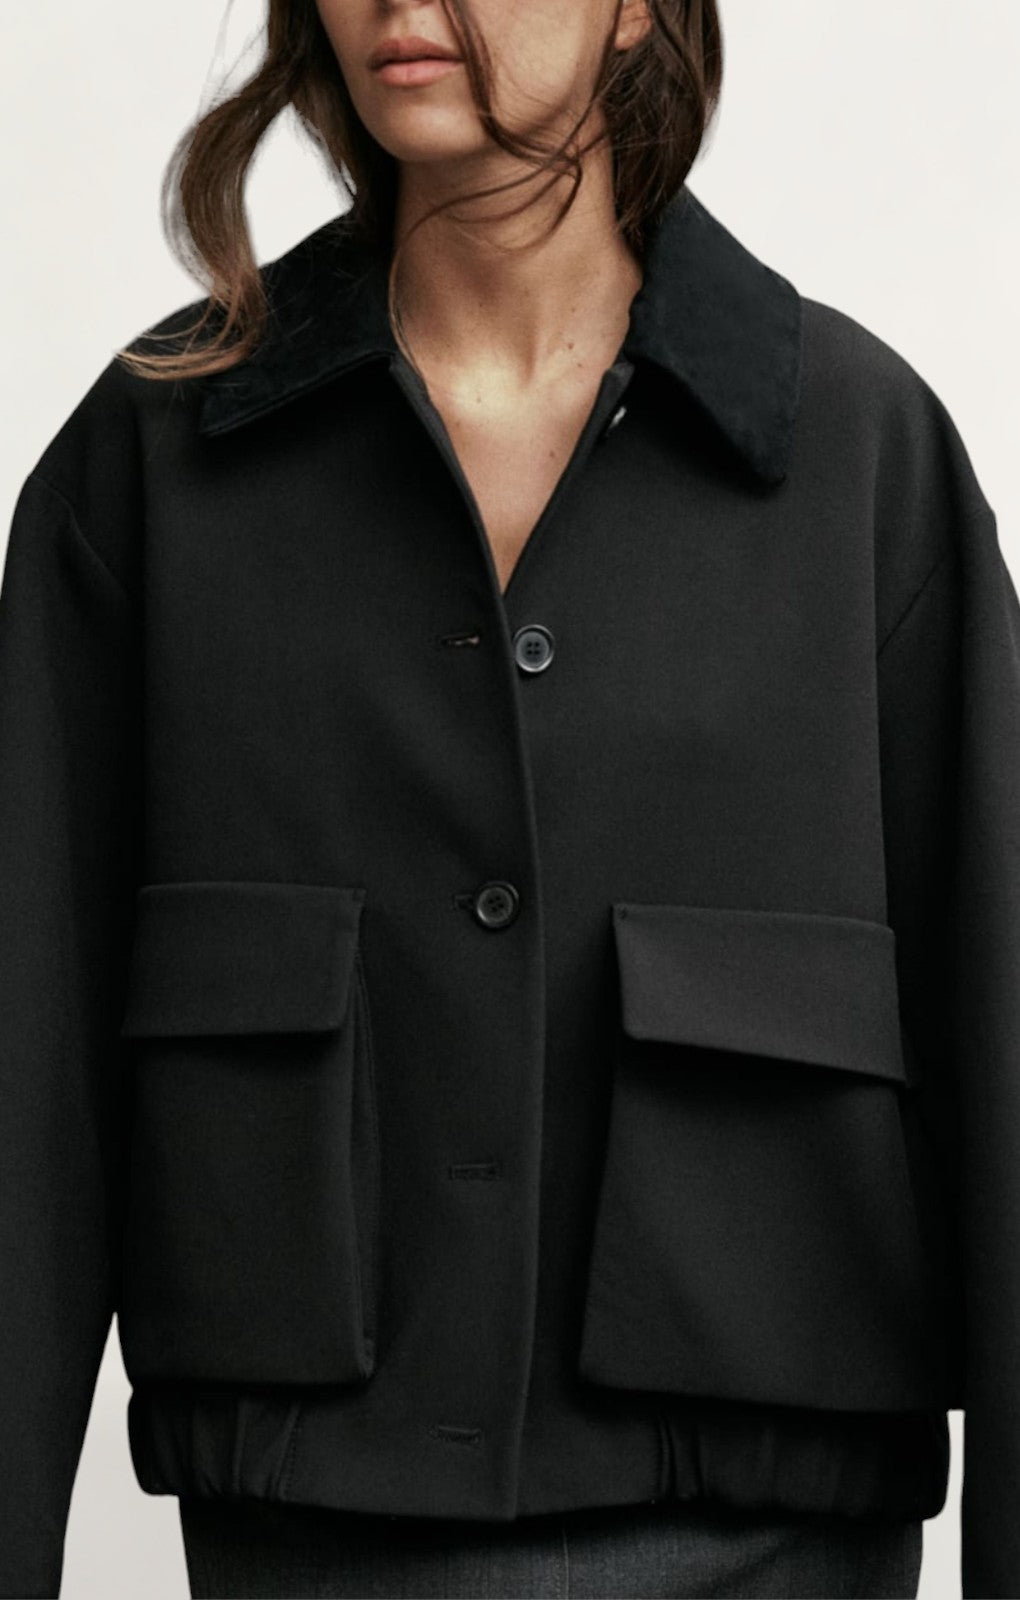 Zara Collection Contrast Bomber Jacket product image